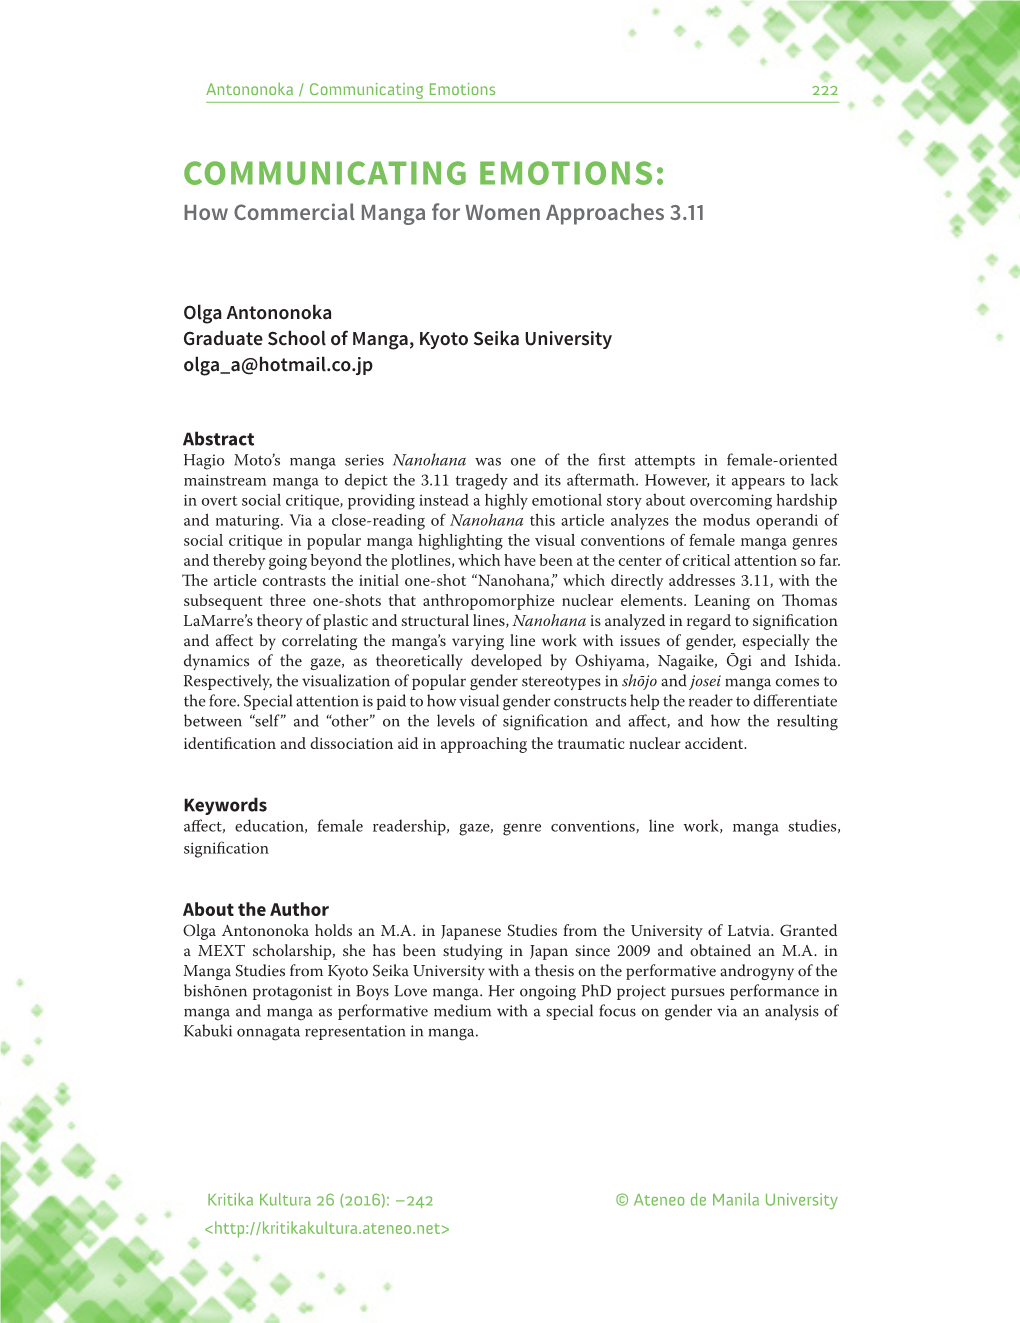 COMMUNICATING EMOTIONS: How Commercial Manga for Women Approaches 3.11